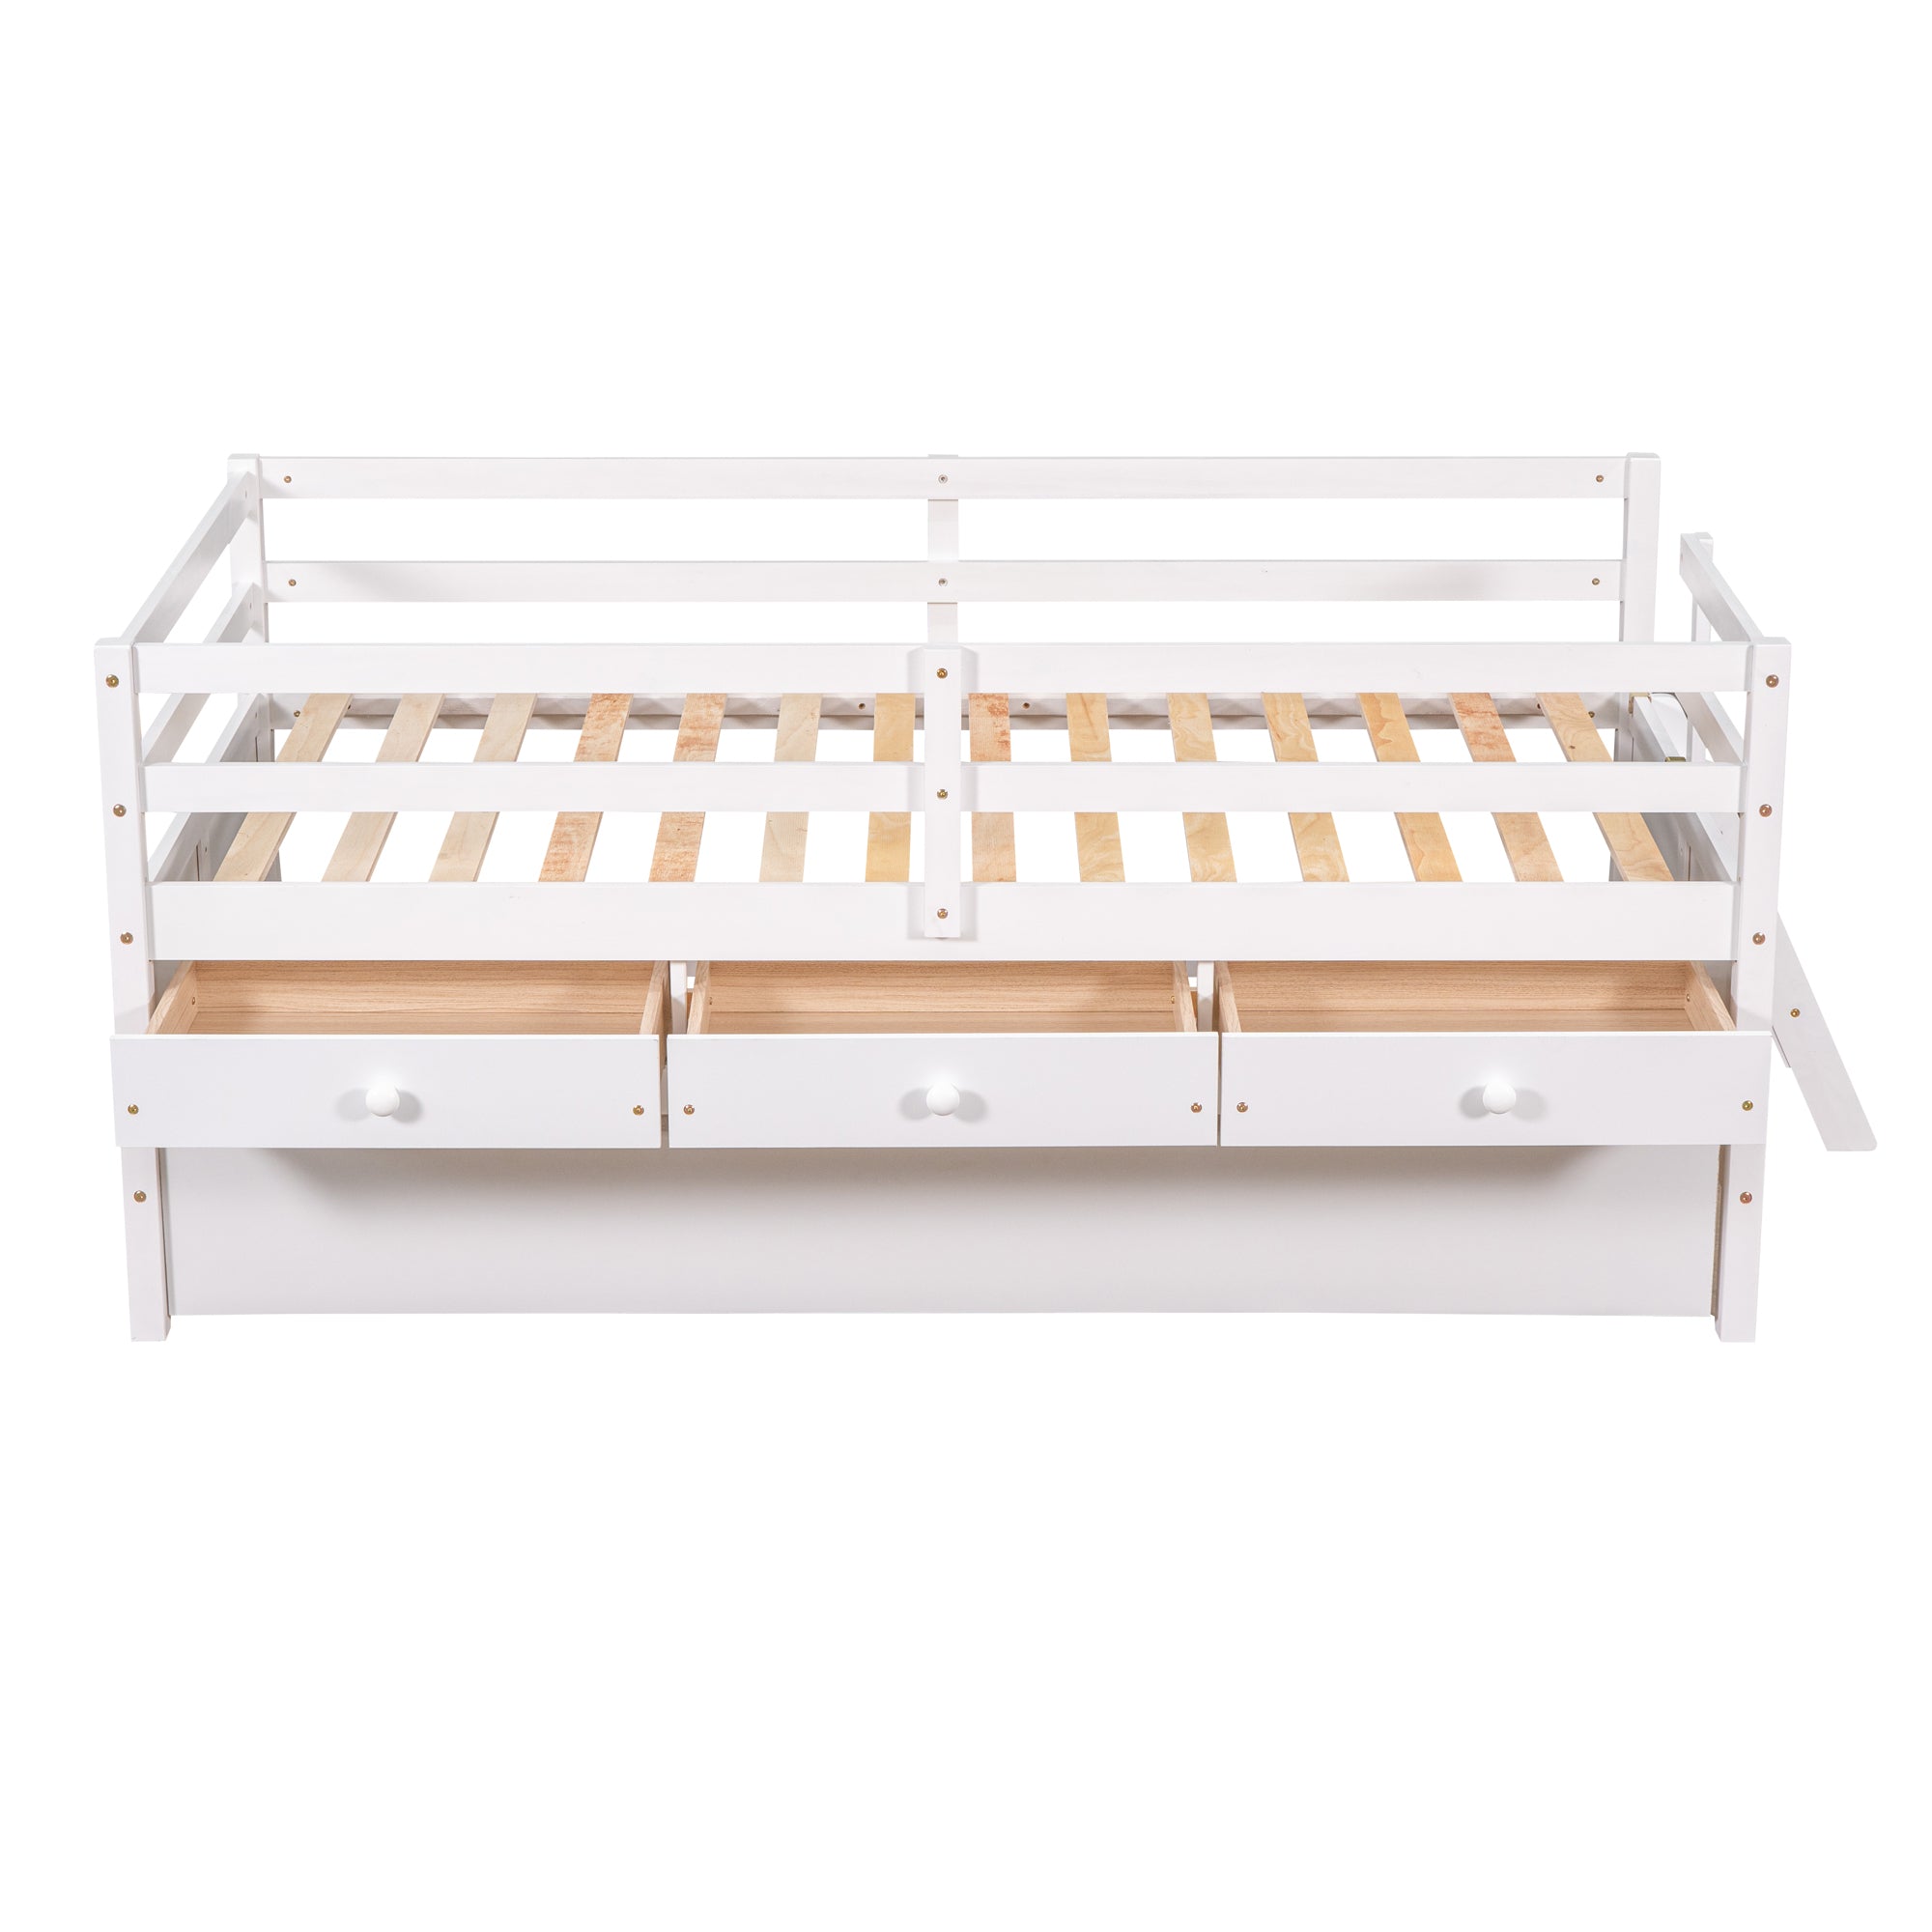 Bellemave Low Loft Bed with Full Safety Fence, Climbing ladder, Storage Drawers and Trundle